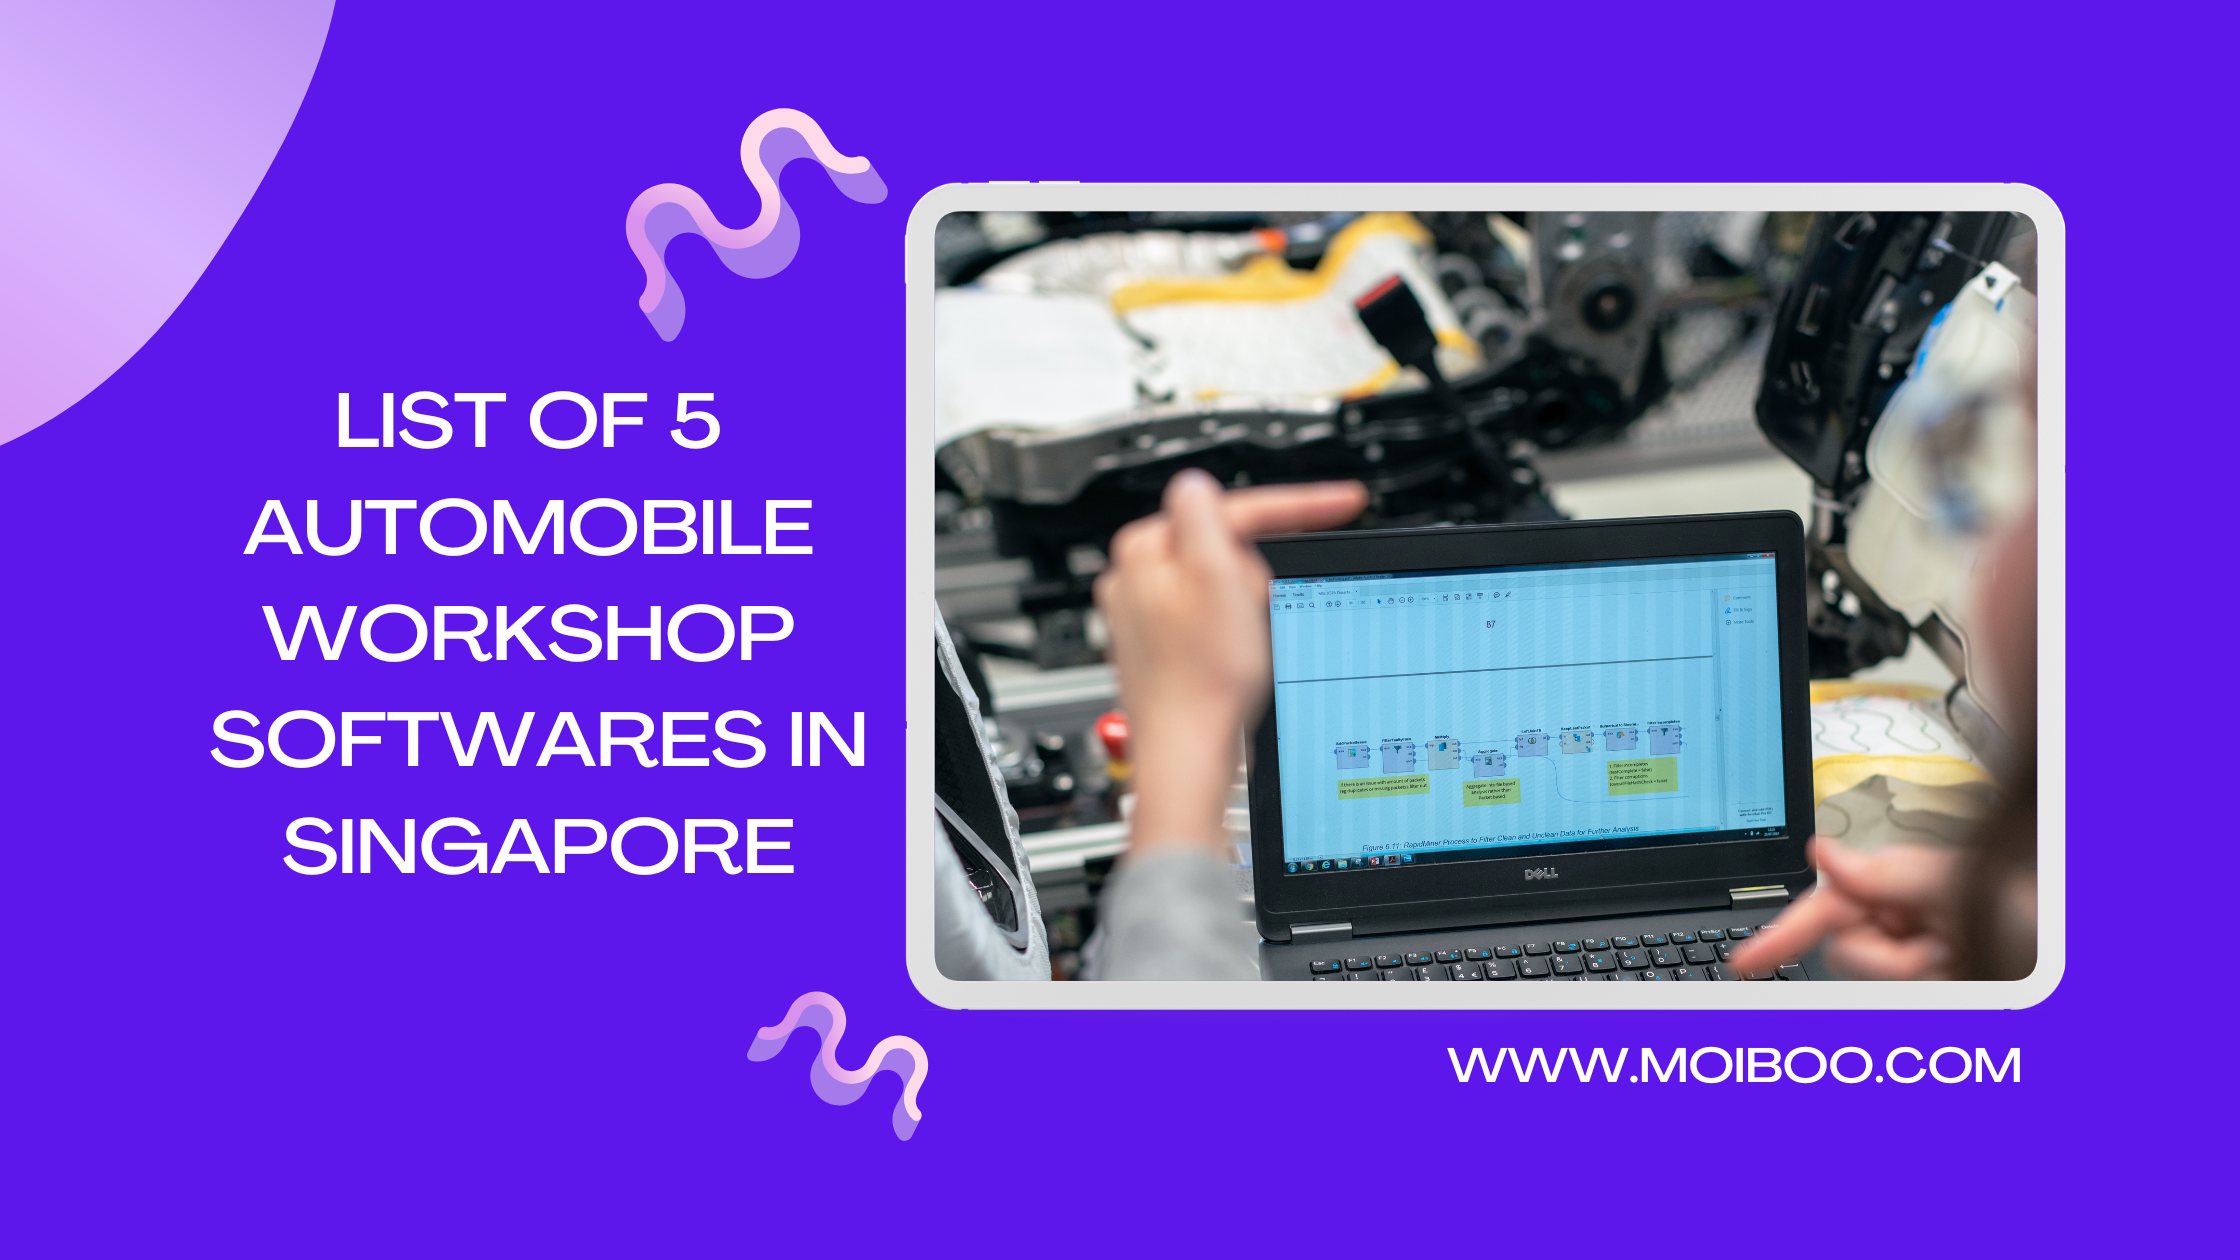 List of 5 Automobile Workshop softwares in Singapore